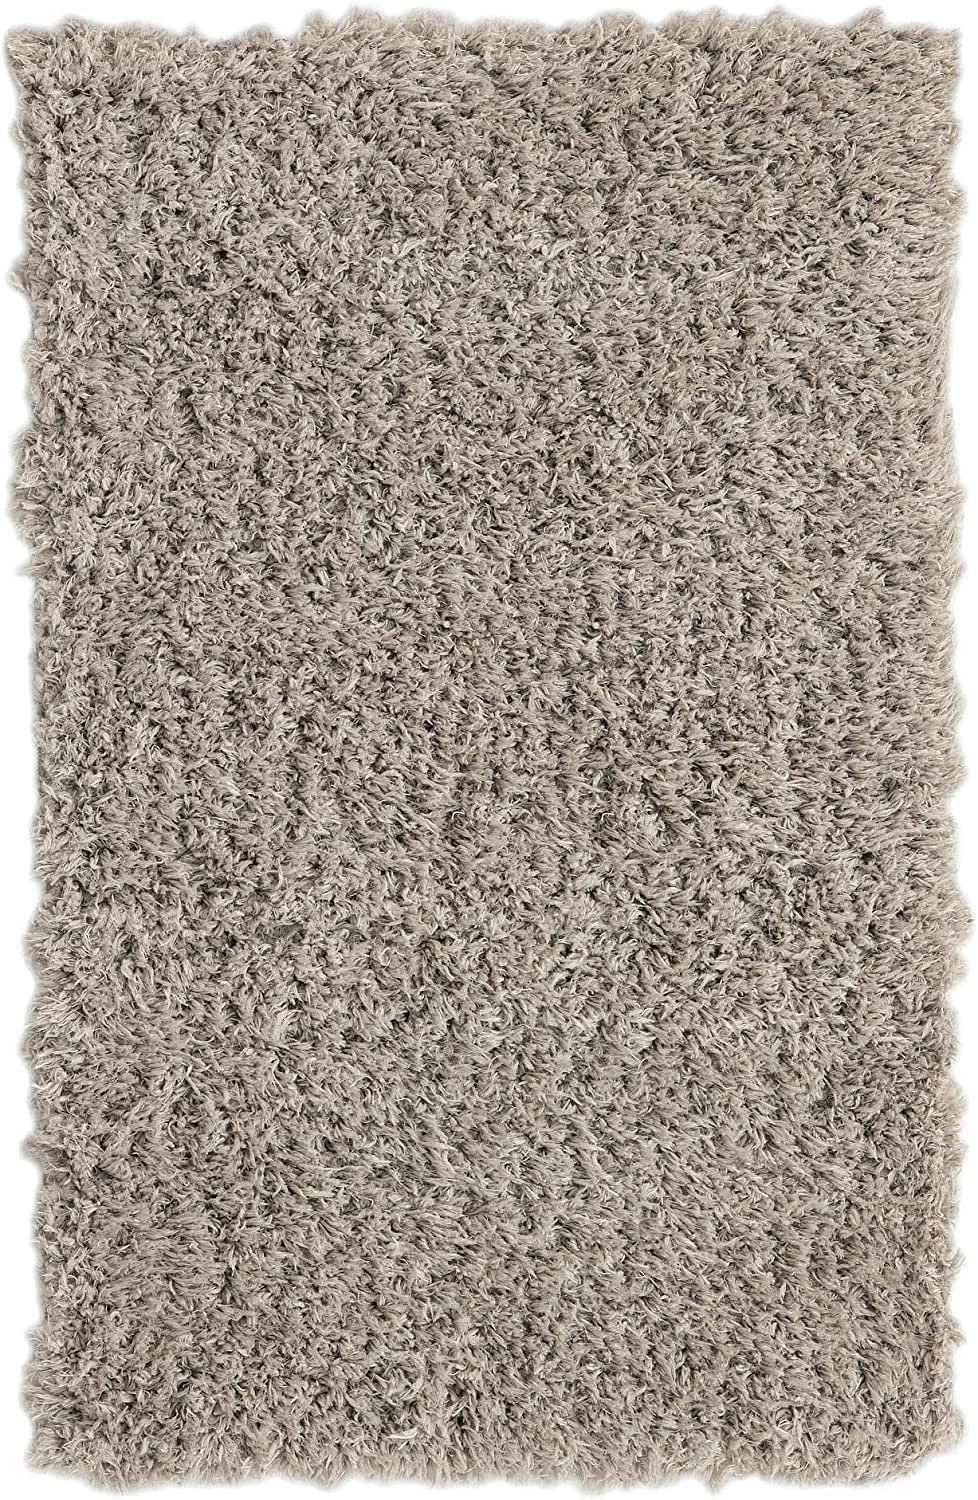 Rugs Infinity Collection Solid Shag Area Rug – | Ubuy India For Ash Infinity Shag Rugs (View 8 of 15)